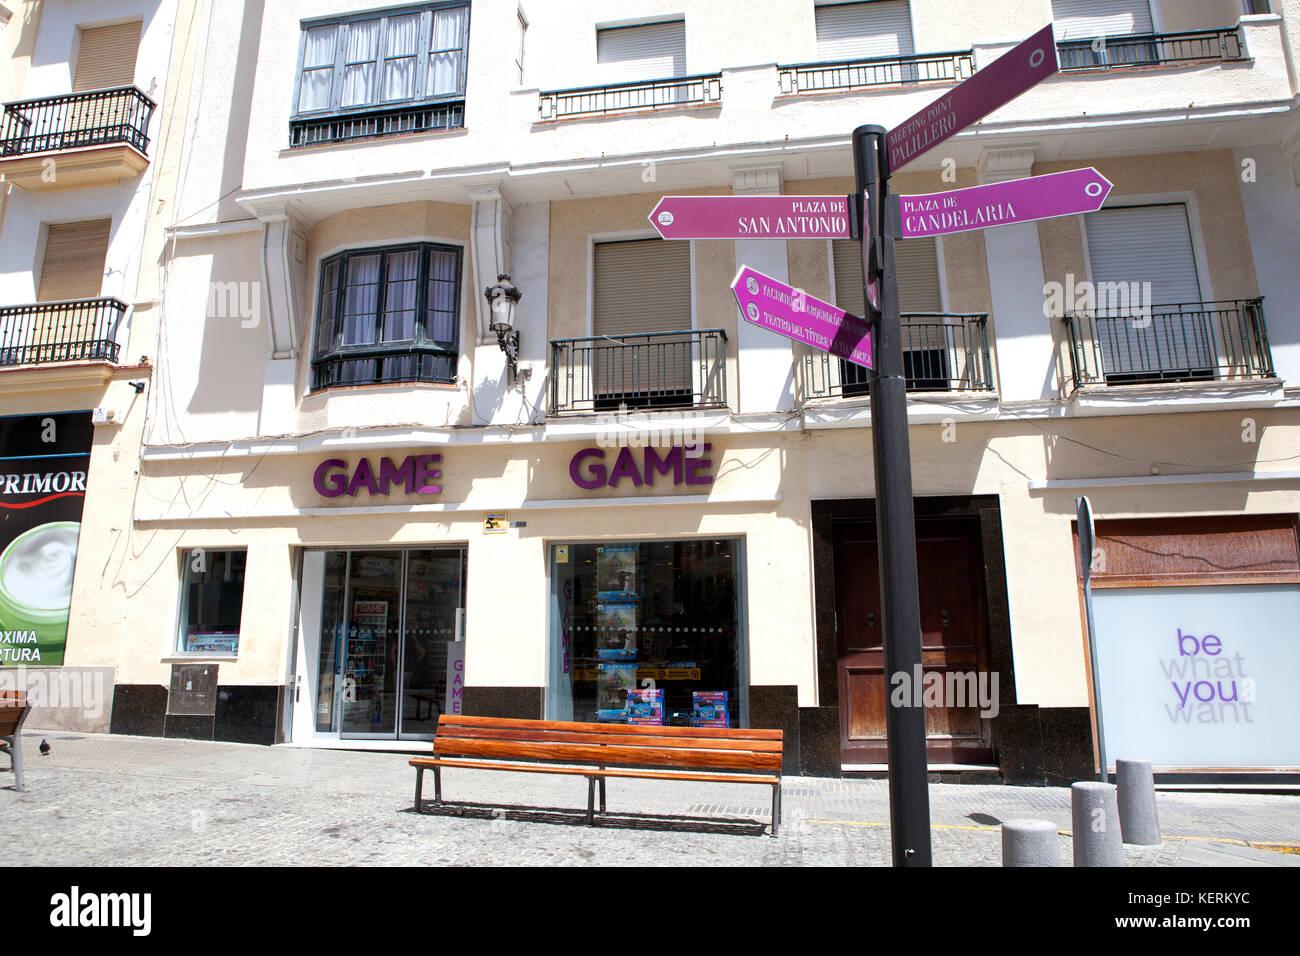 Game store in Cadiz an ancient port city in southwest Spain Stock Photo